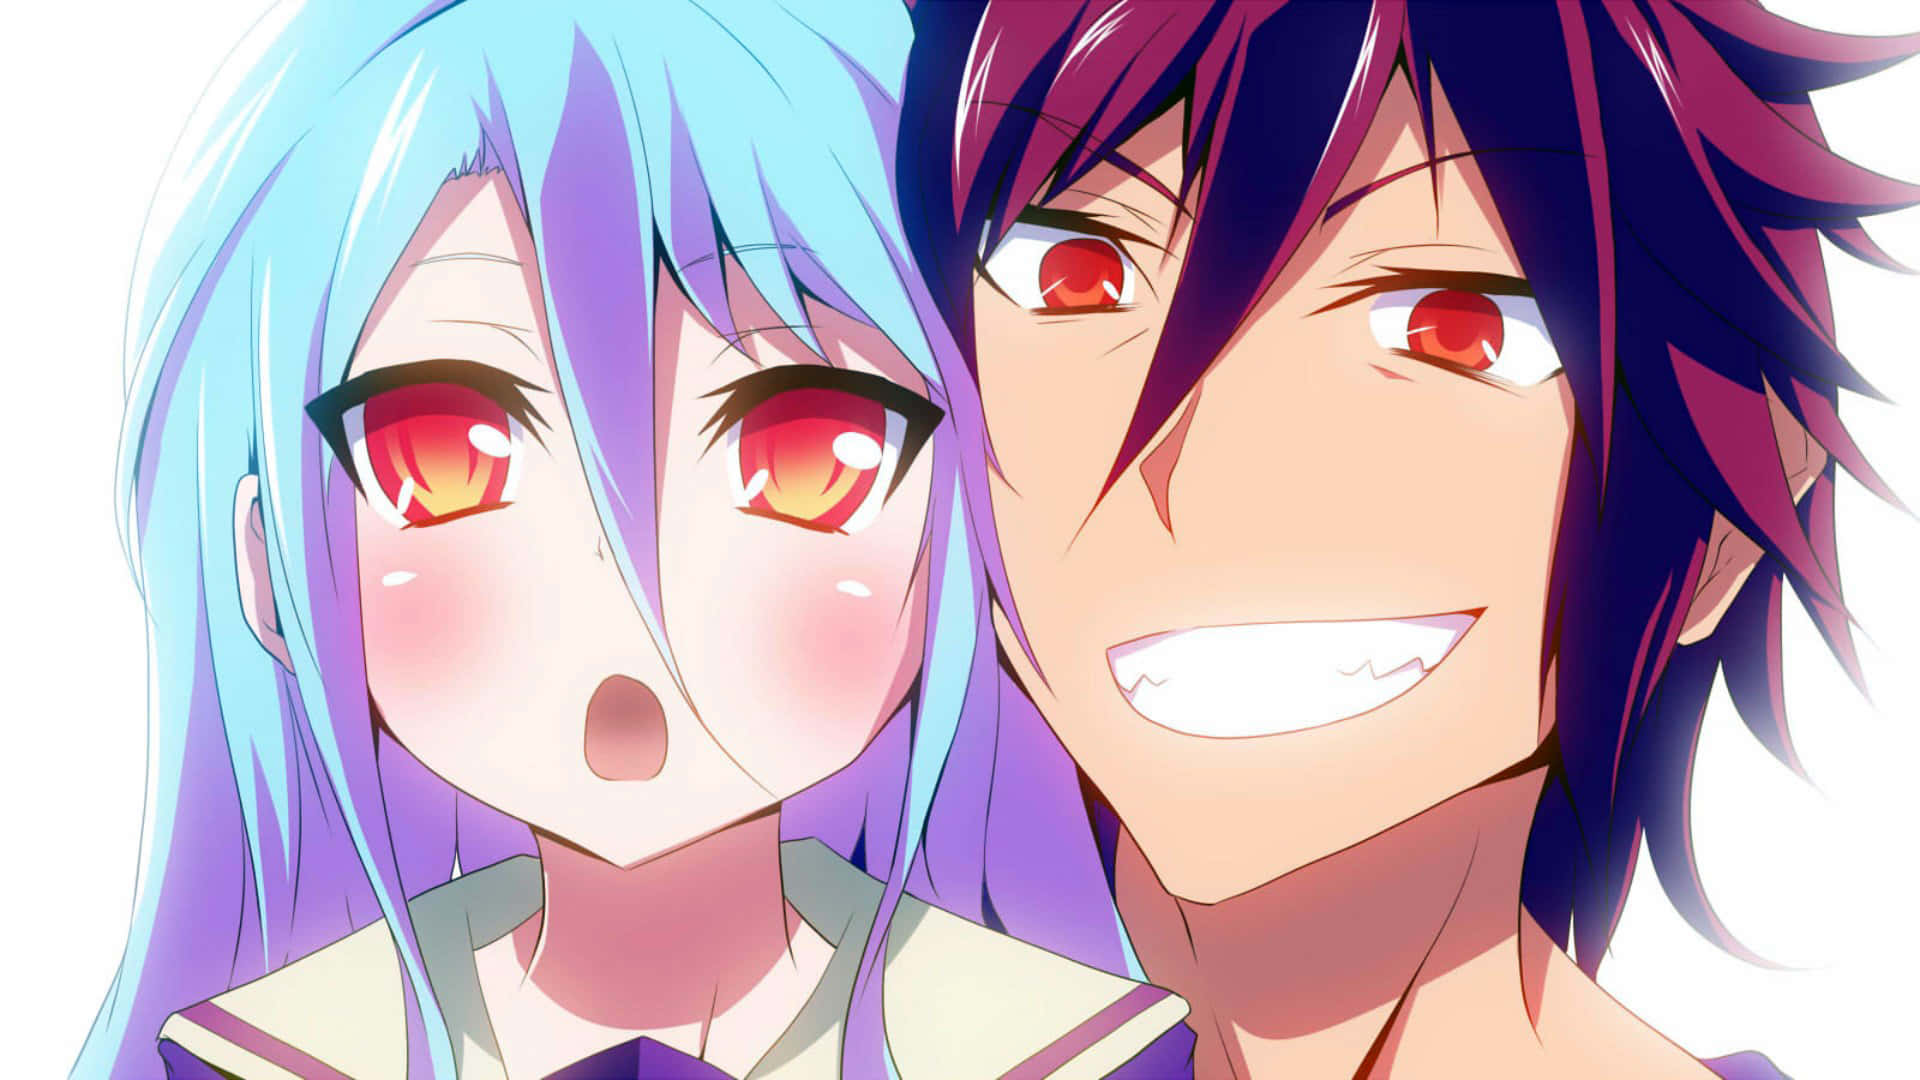 Follow the rules of the game, because there's no game no life.